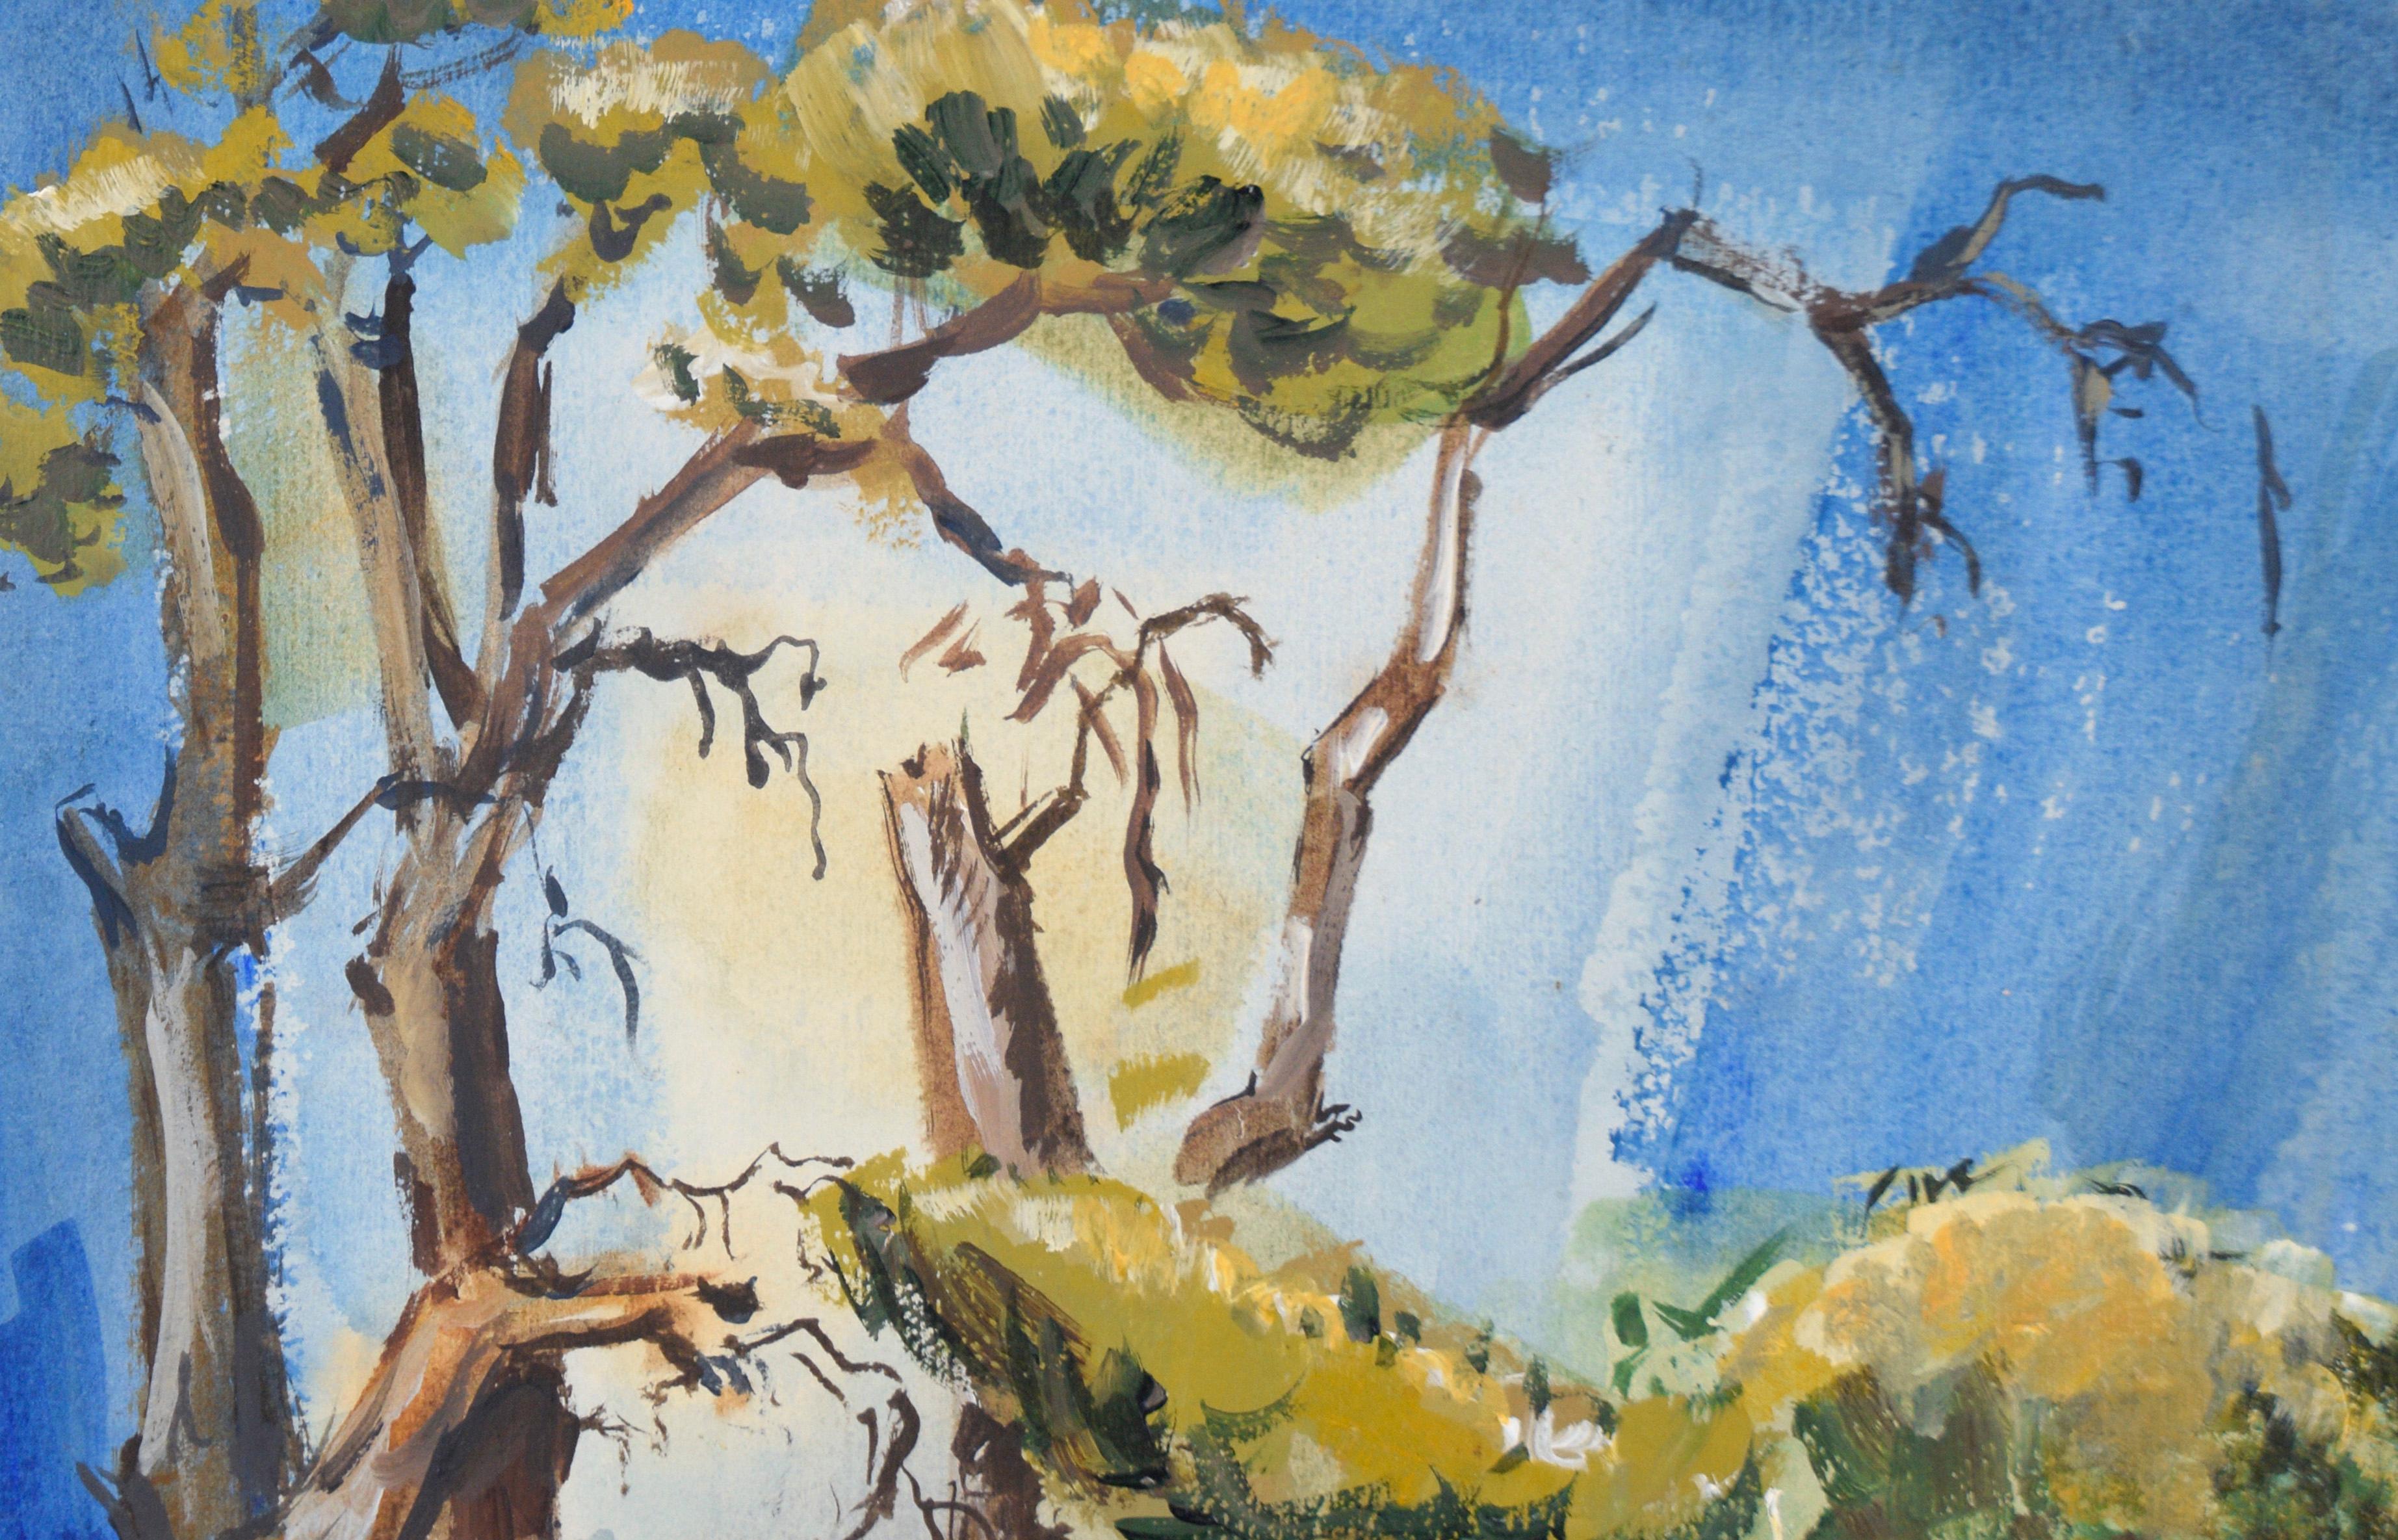 Mid Century Modern Vertical Landscape with Fence in Acrylic on Paper

Vibrant landscape by California artist Bertram Spencer (American, 1918-1992). Several large trees rise out of dense brush, reaching into a bold blue sky. At the bottom of the